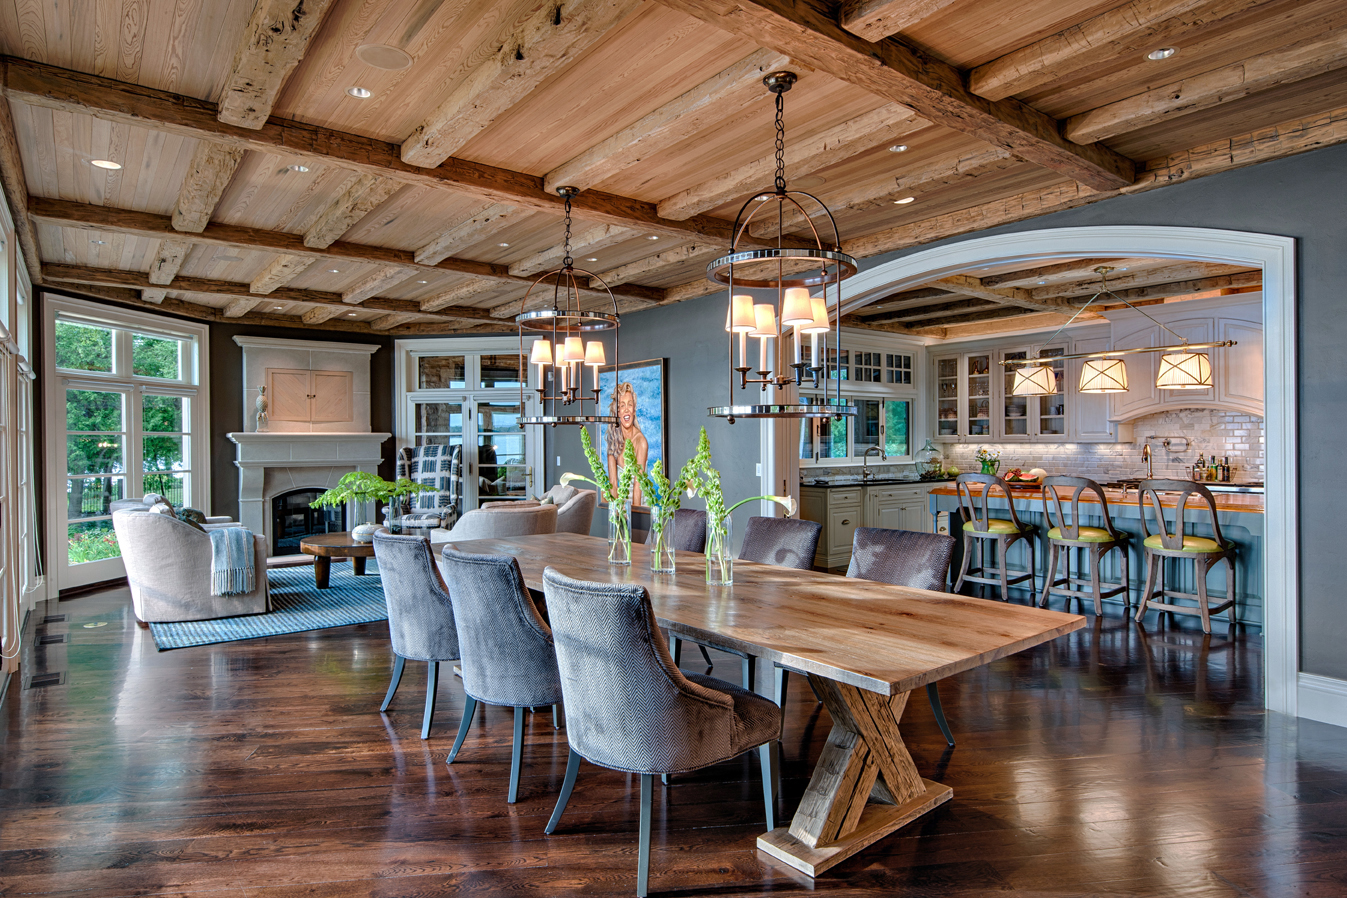 Timbers Ceiling Cladding Flooring and Reclaimed Dining Table in Door County Residence